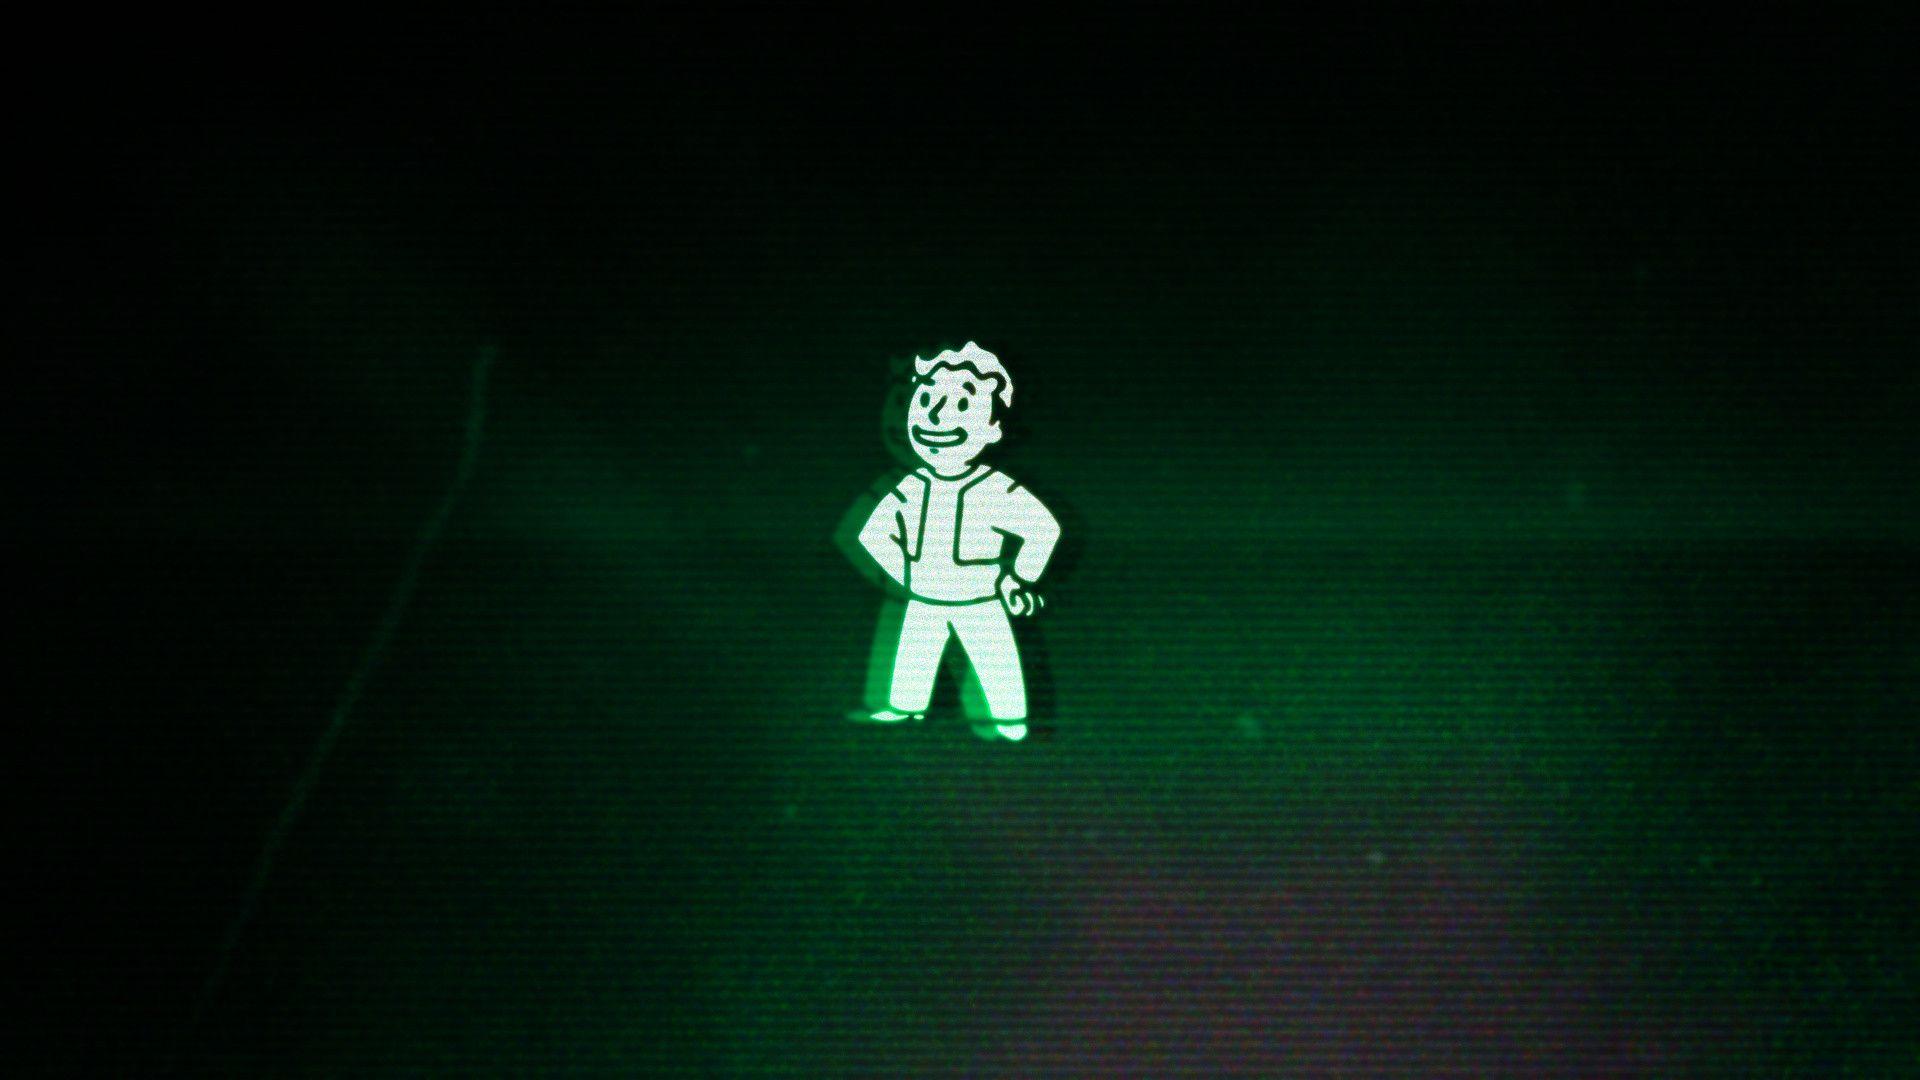 fallout pipboy background